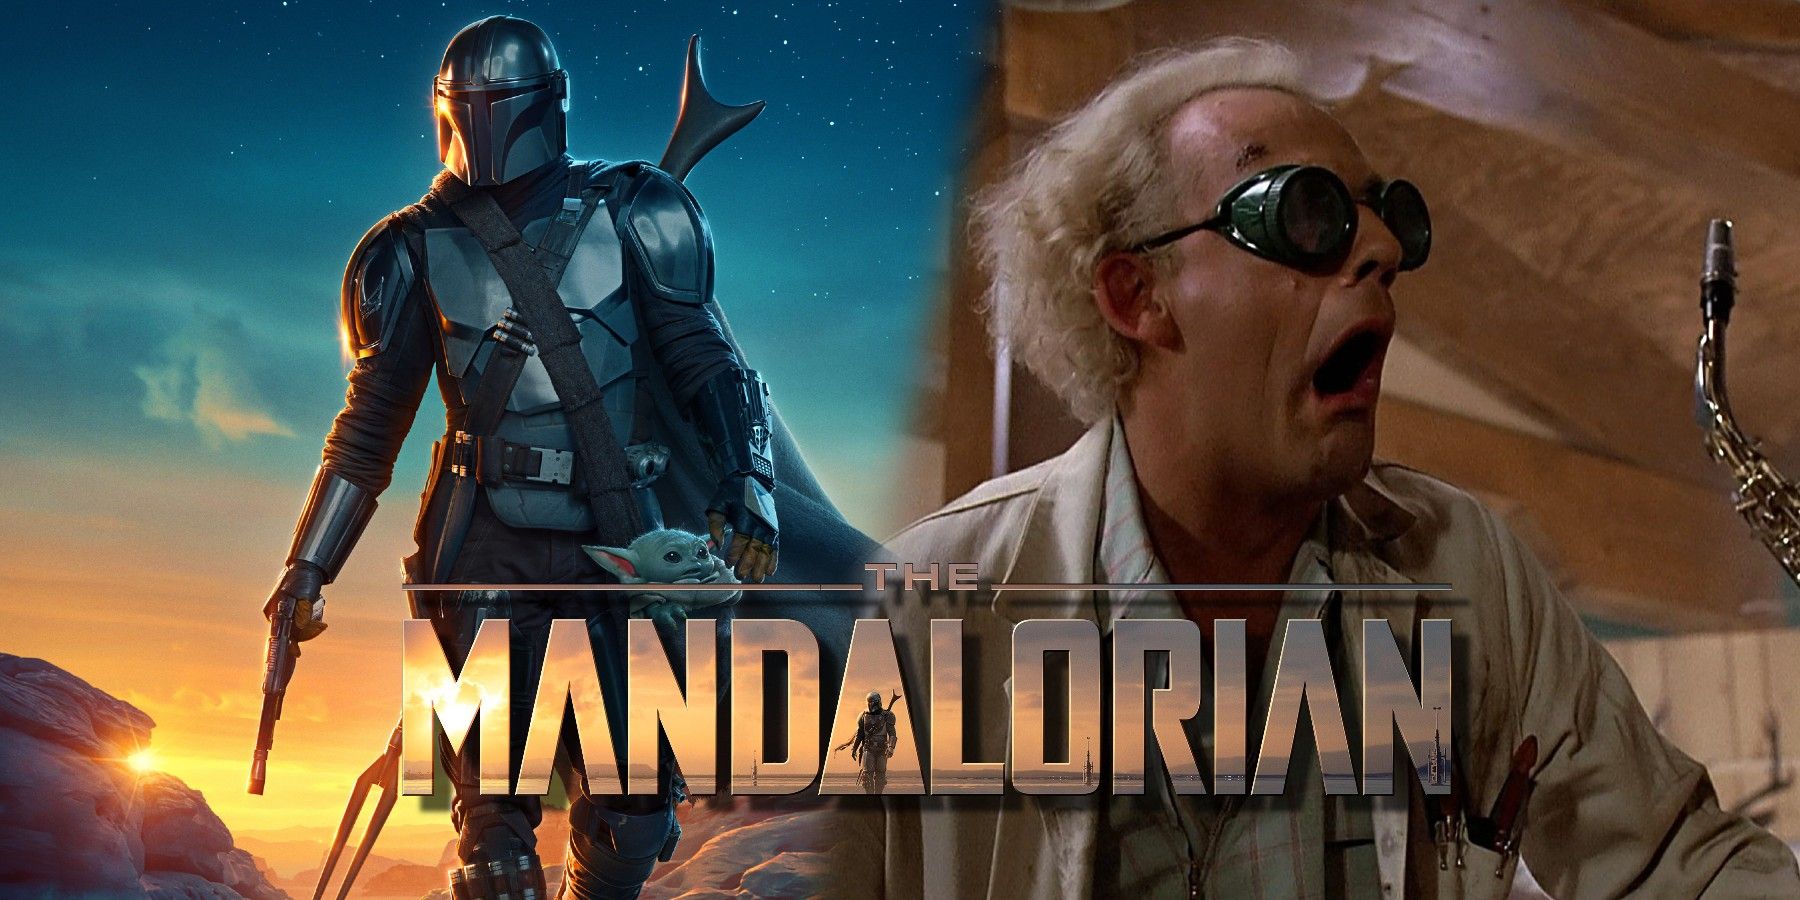 IGN - Great Scott! Christopher Lloyd has joined the cast of The Mandalorian  Season 3. His role is currently being kept under wraps.